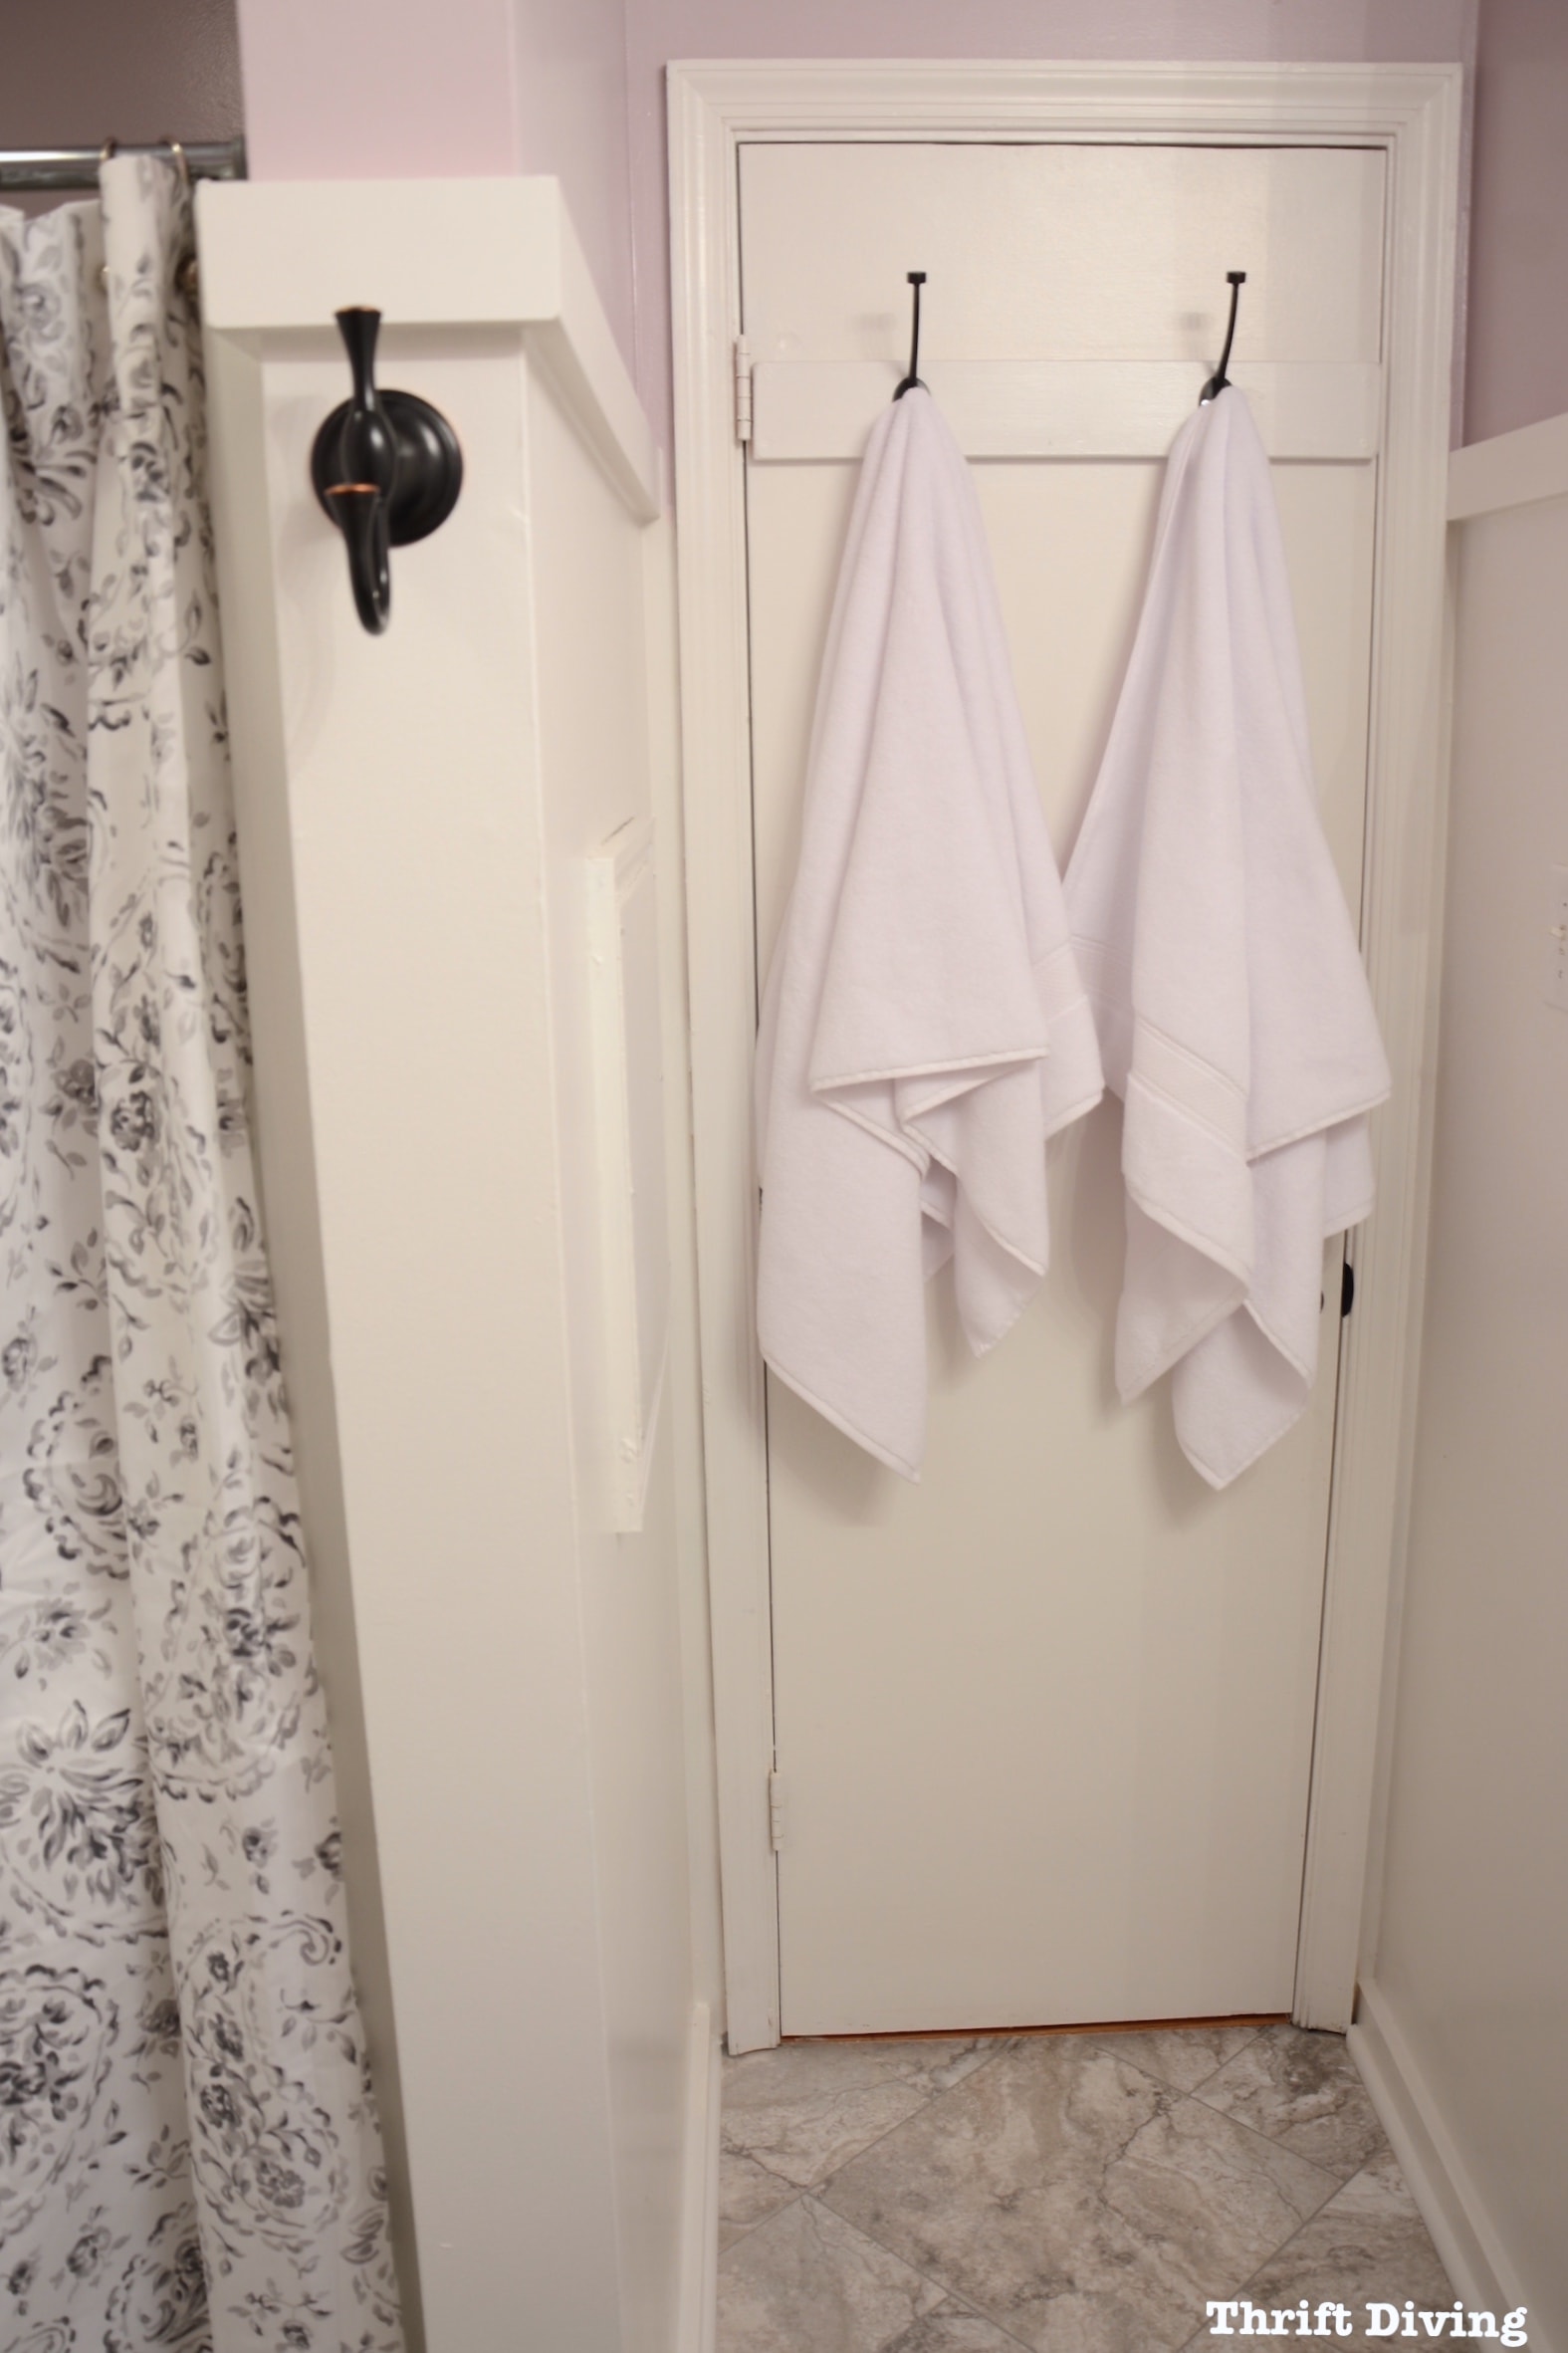 Pretty lavender master bathroom makeover - Behr Mulberry Stain wall color and hook on door. - Thrift Diving